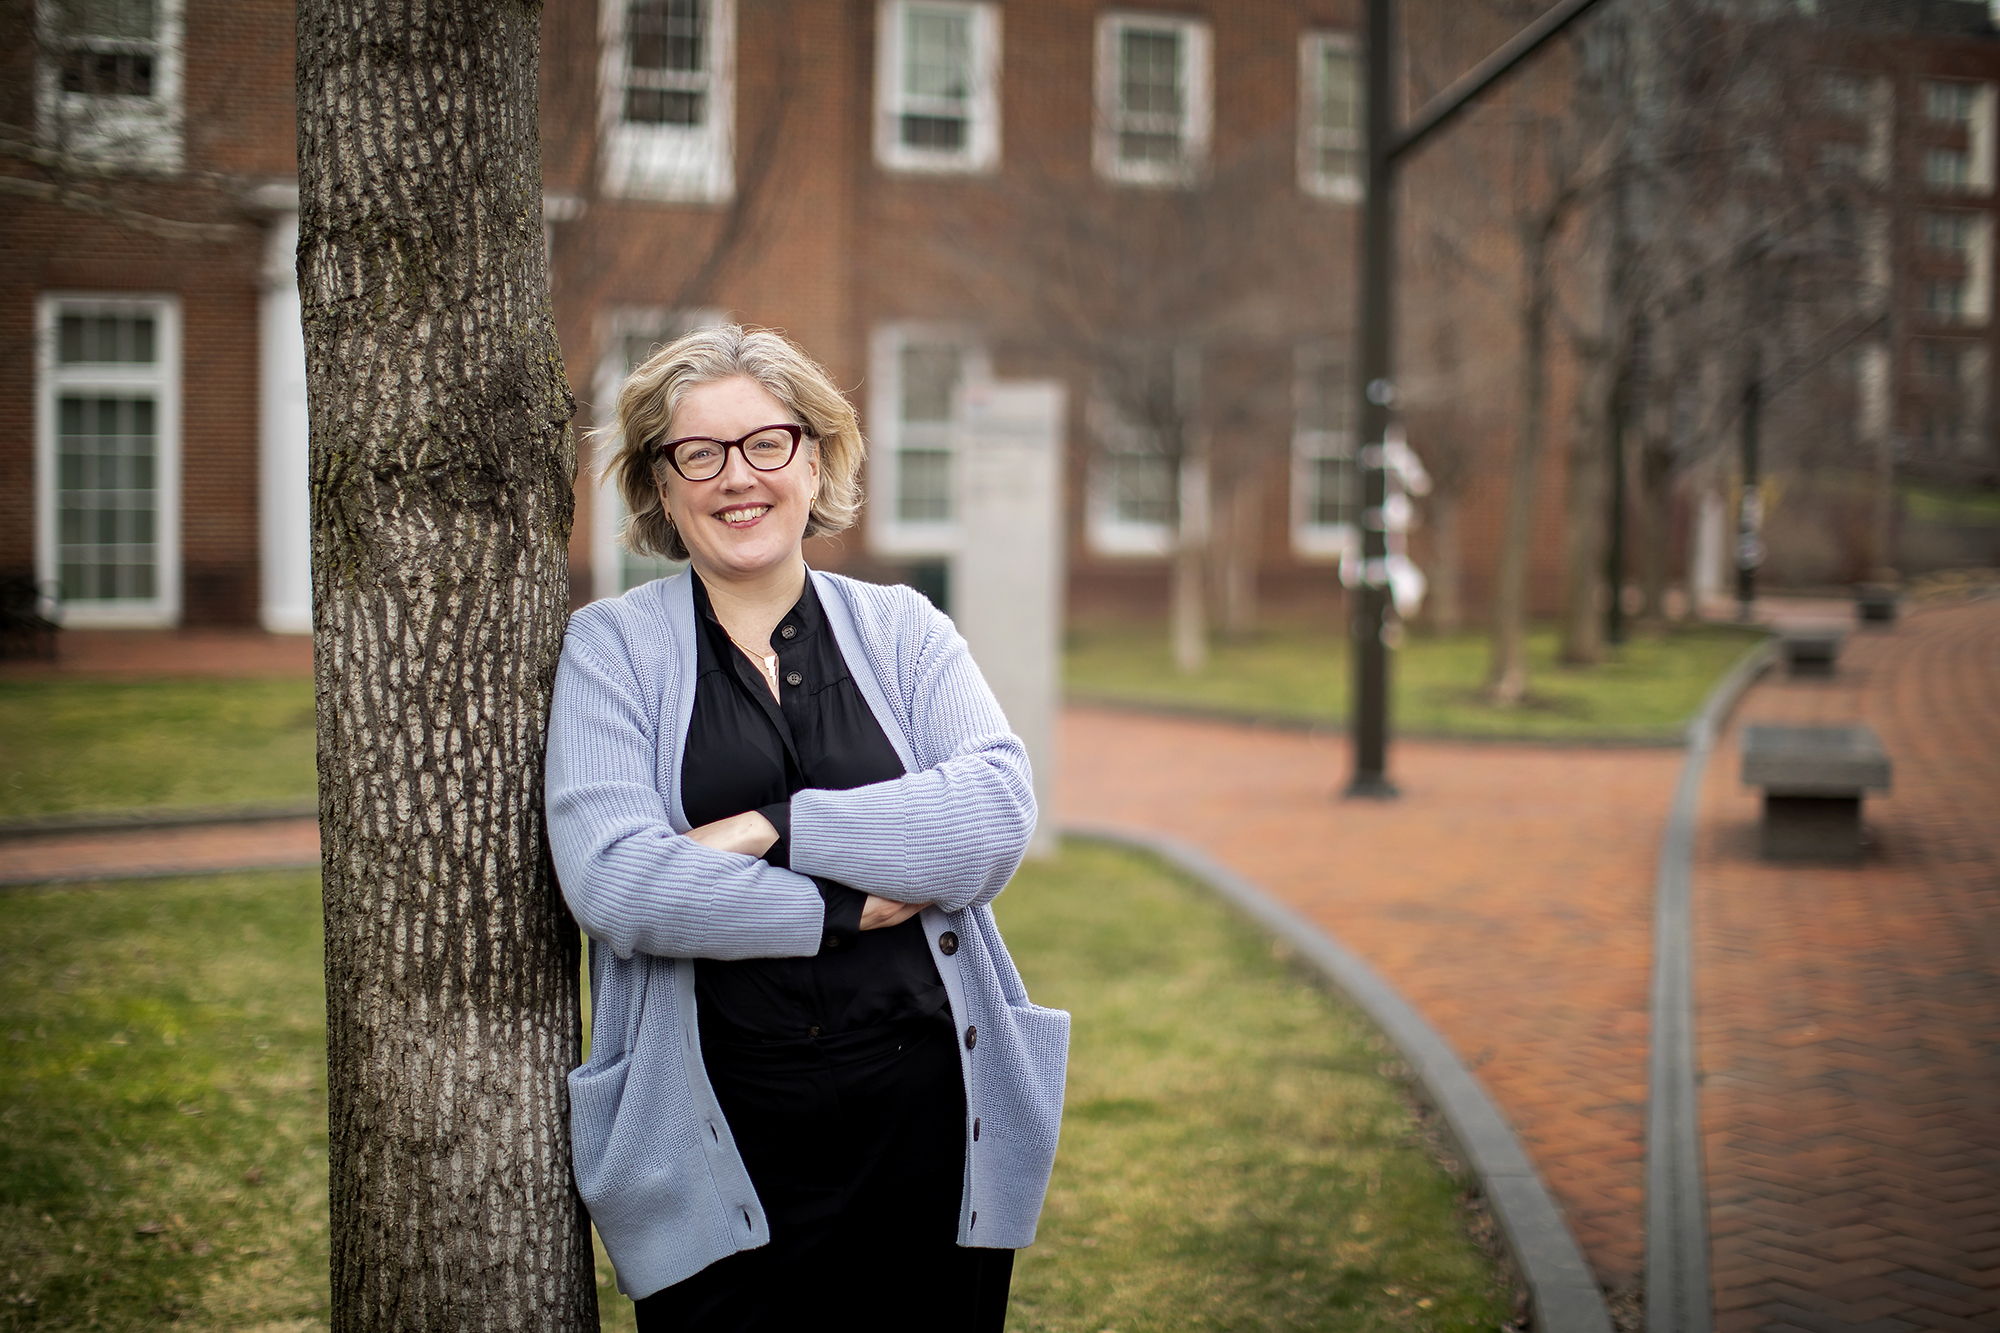 Emma Hart leans against a tree in front of the McNeil Center on Penn campus with her arms crossed, smiling at the camera